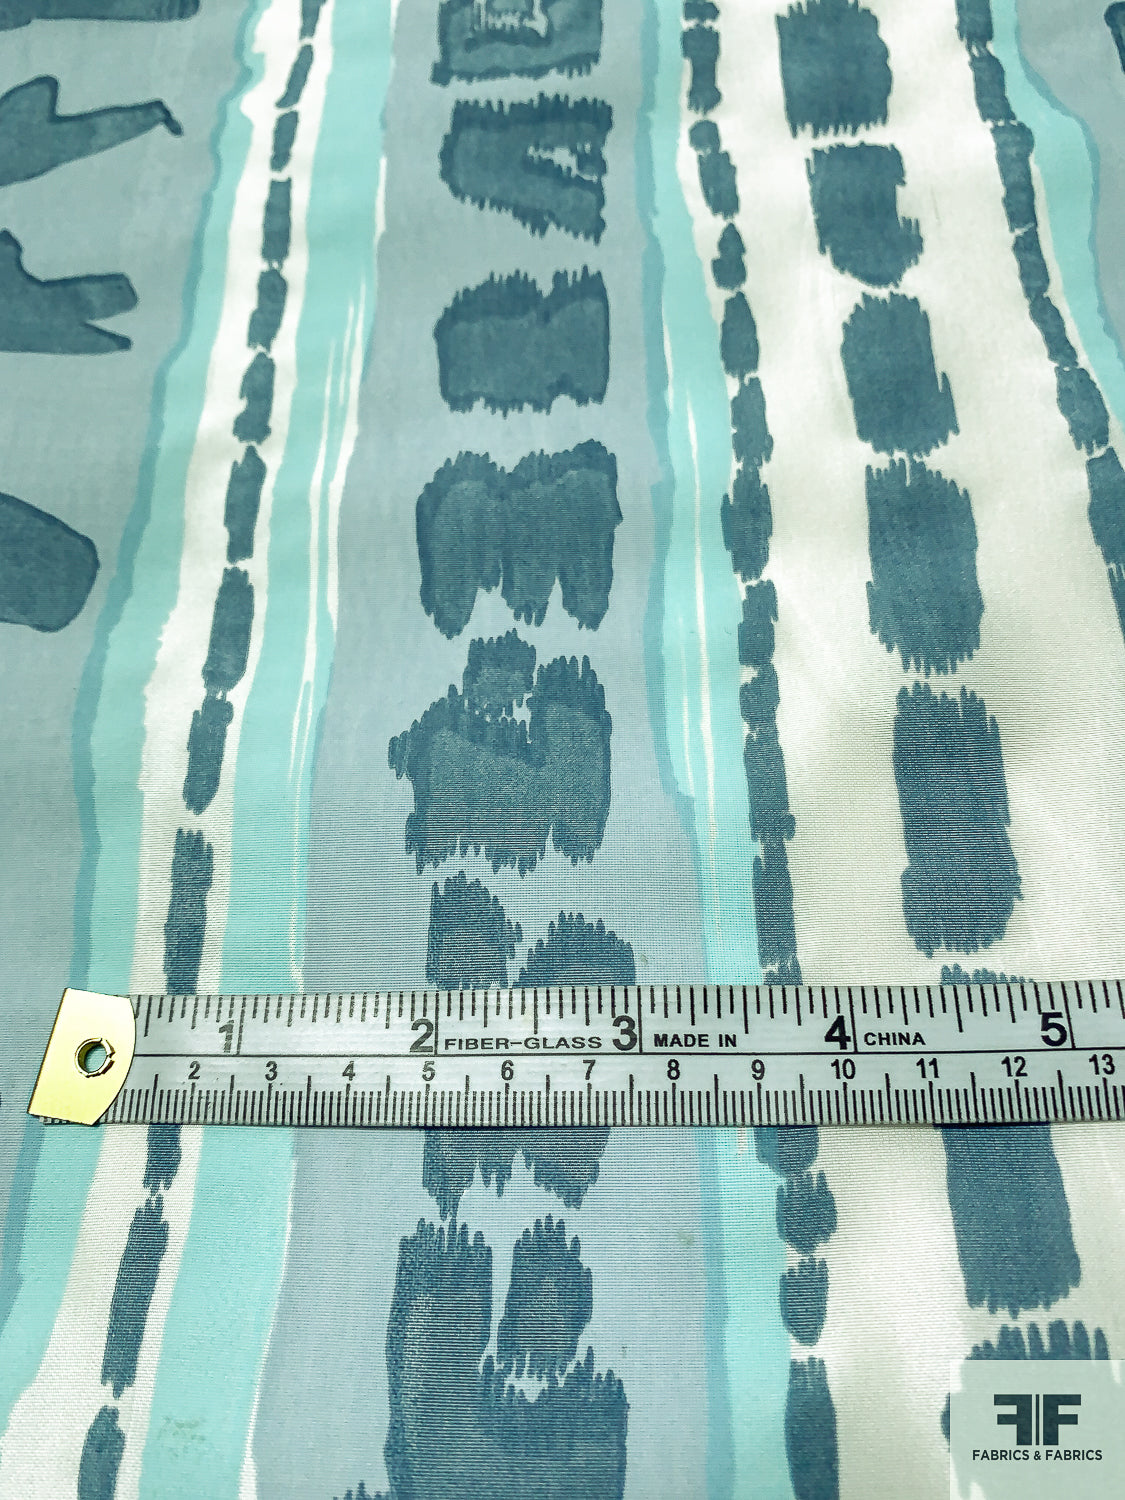 Abstract and Striped Printed Silk Taffeta - Dusty Teal / Turquoise / Light Blue / White